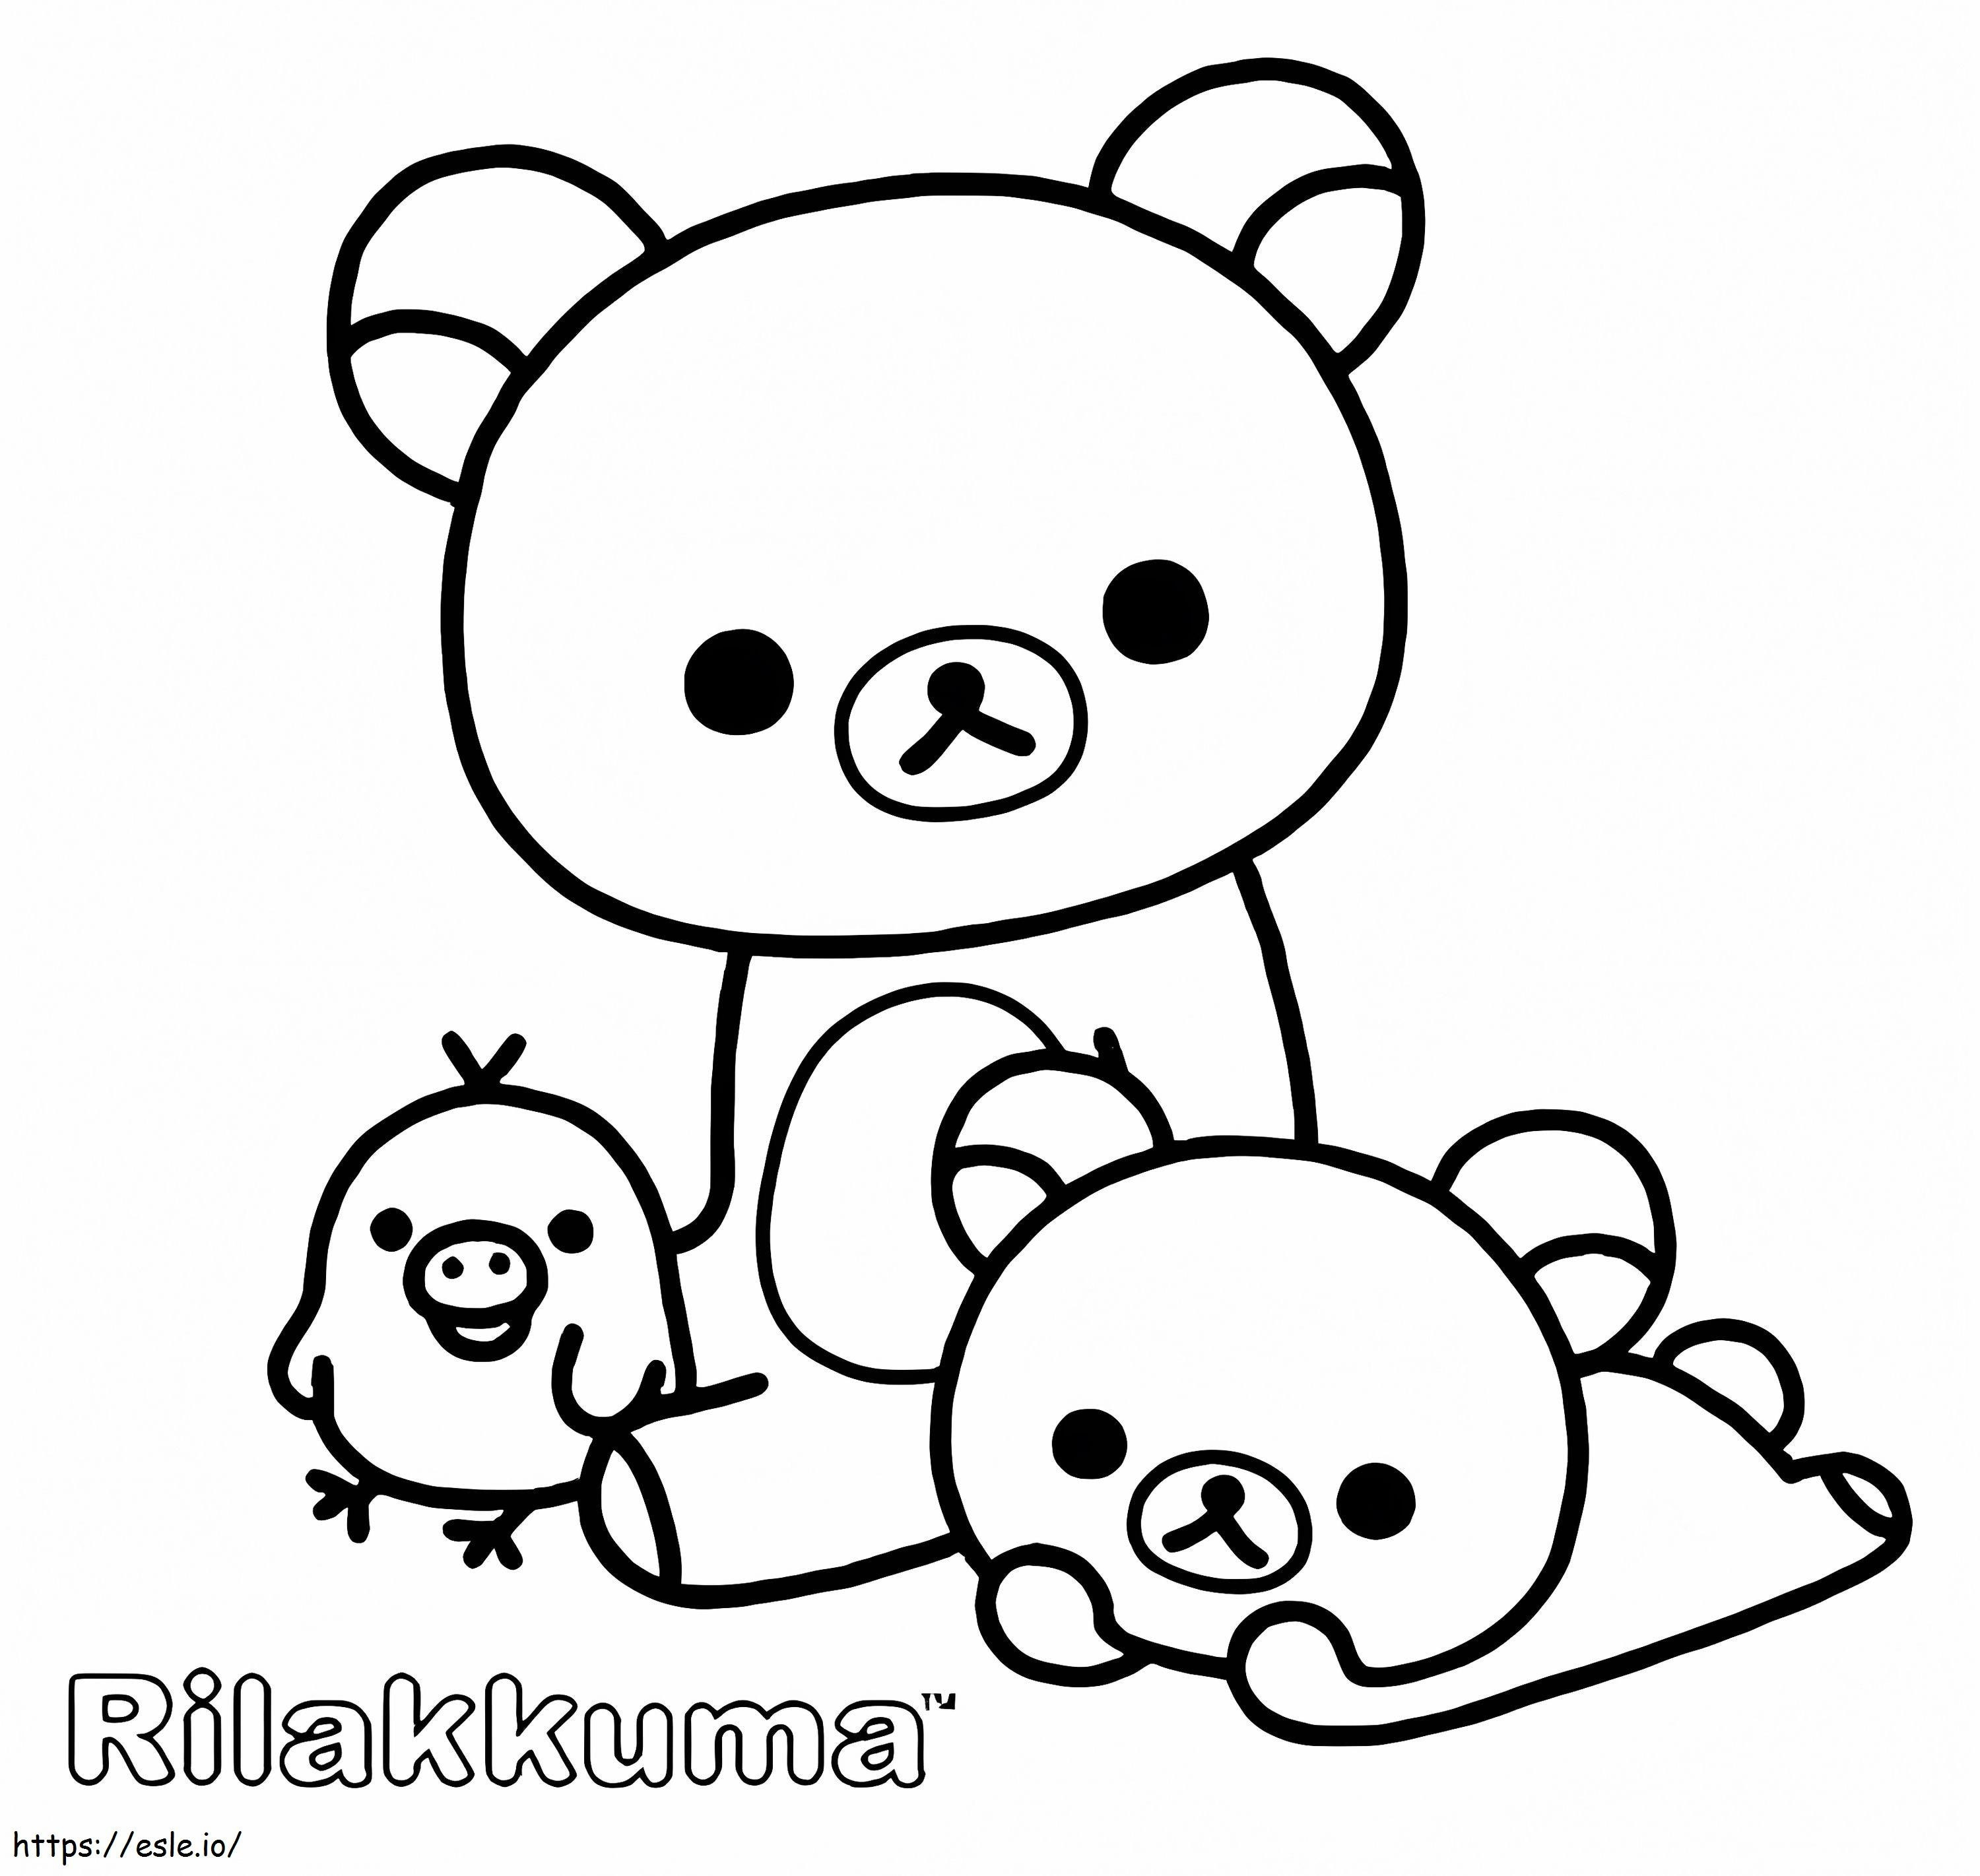 Cute Rilakkuma With Friends coloring page